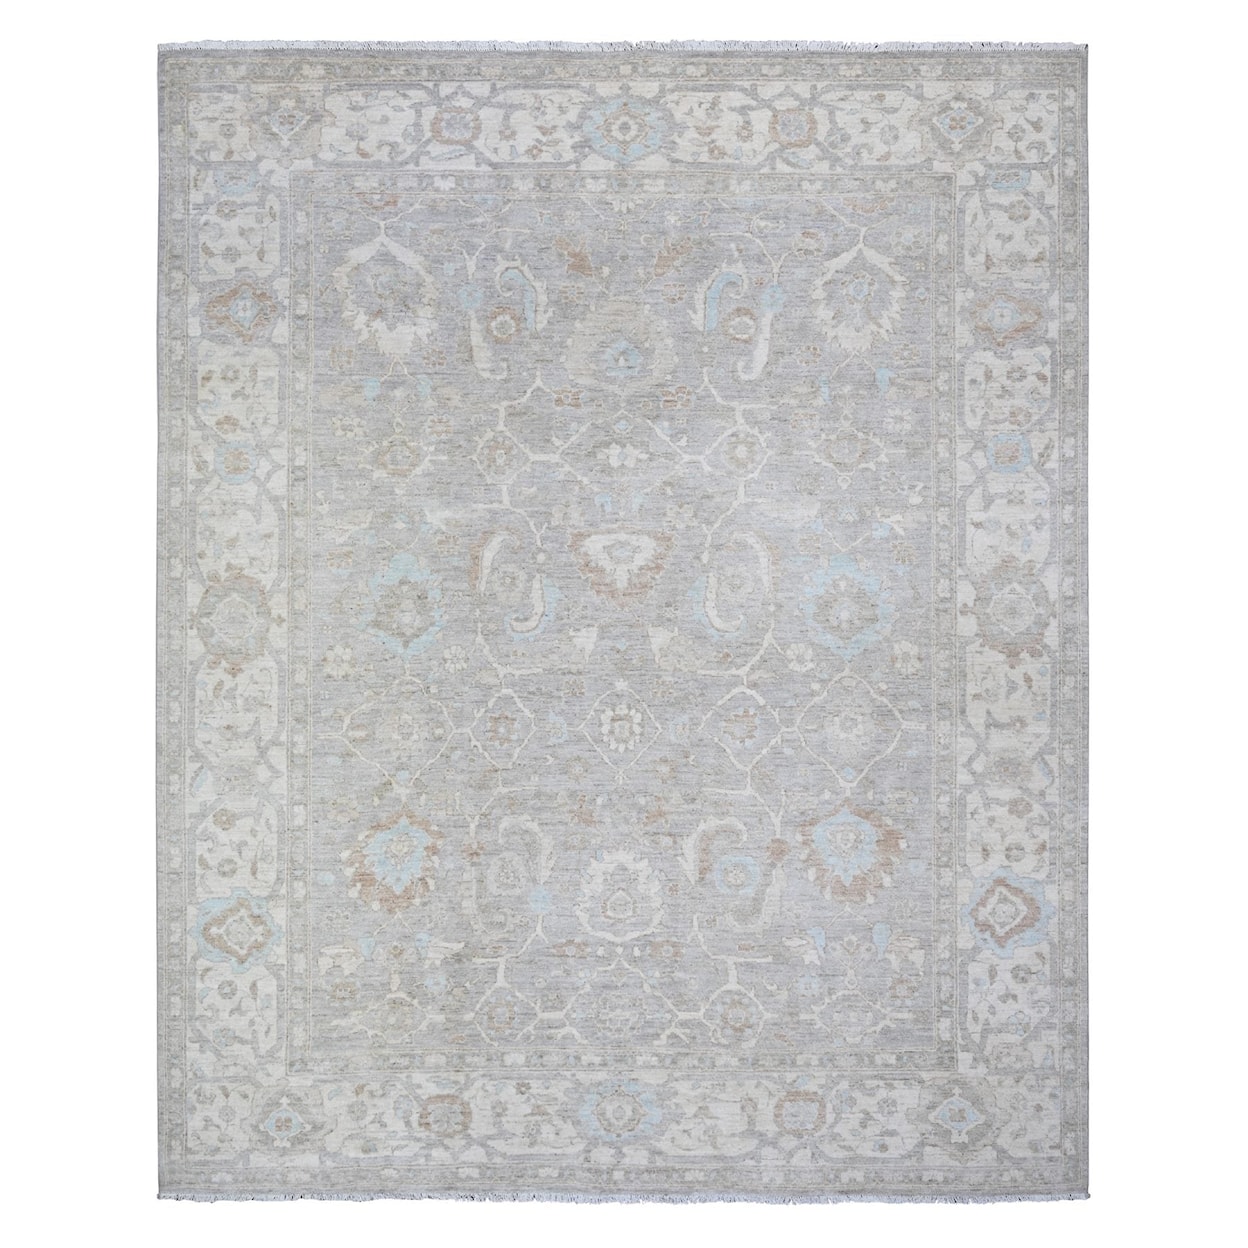 ORC Rugs oushak-and-ziegler-mahal-rugs 9x12  Rug